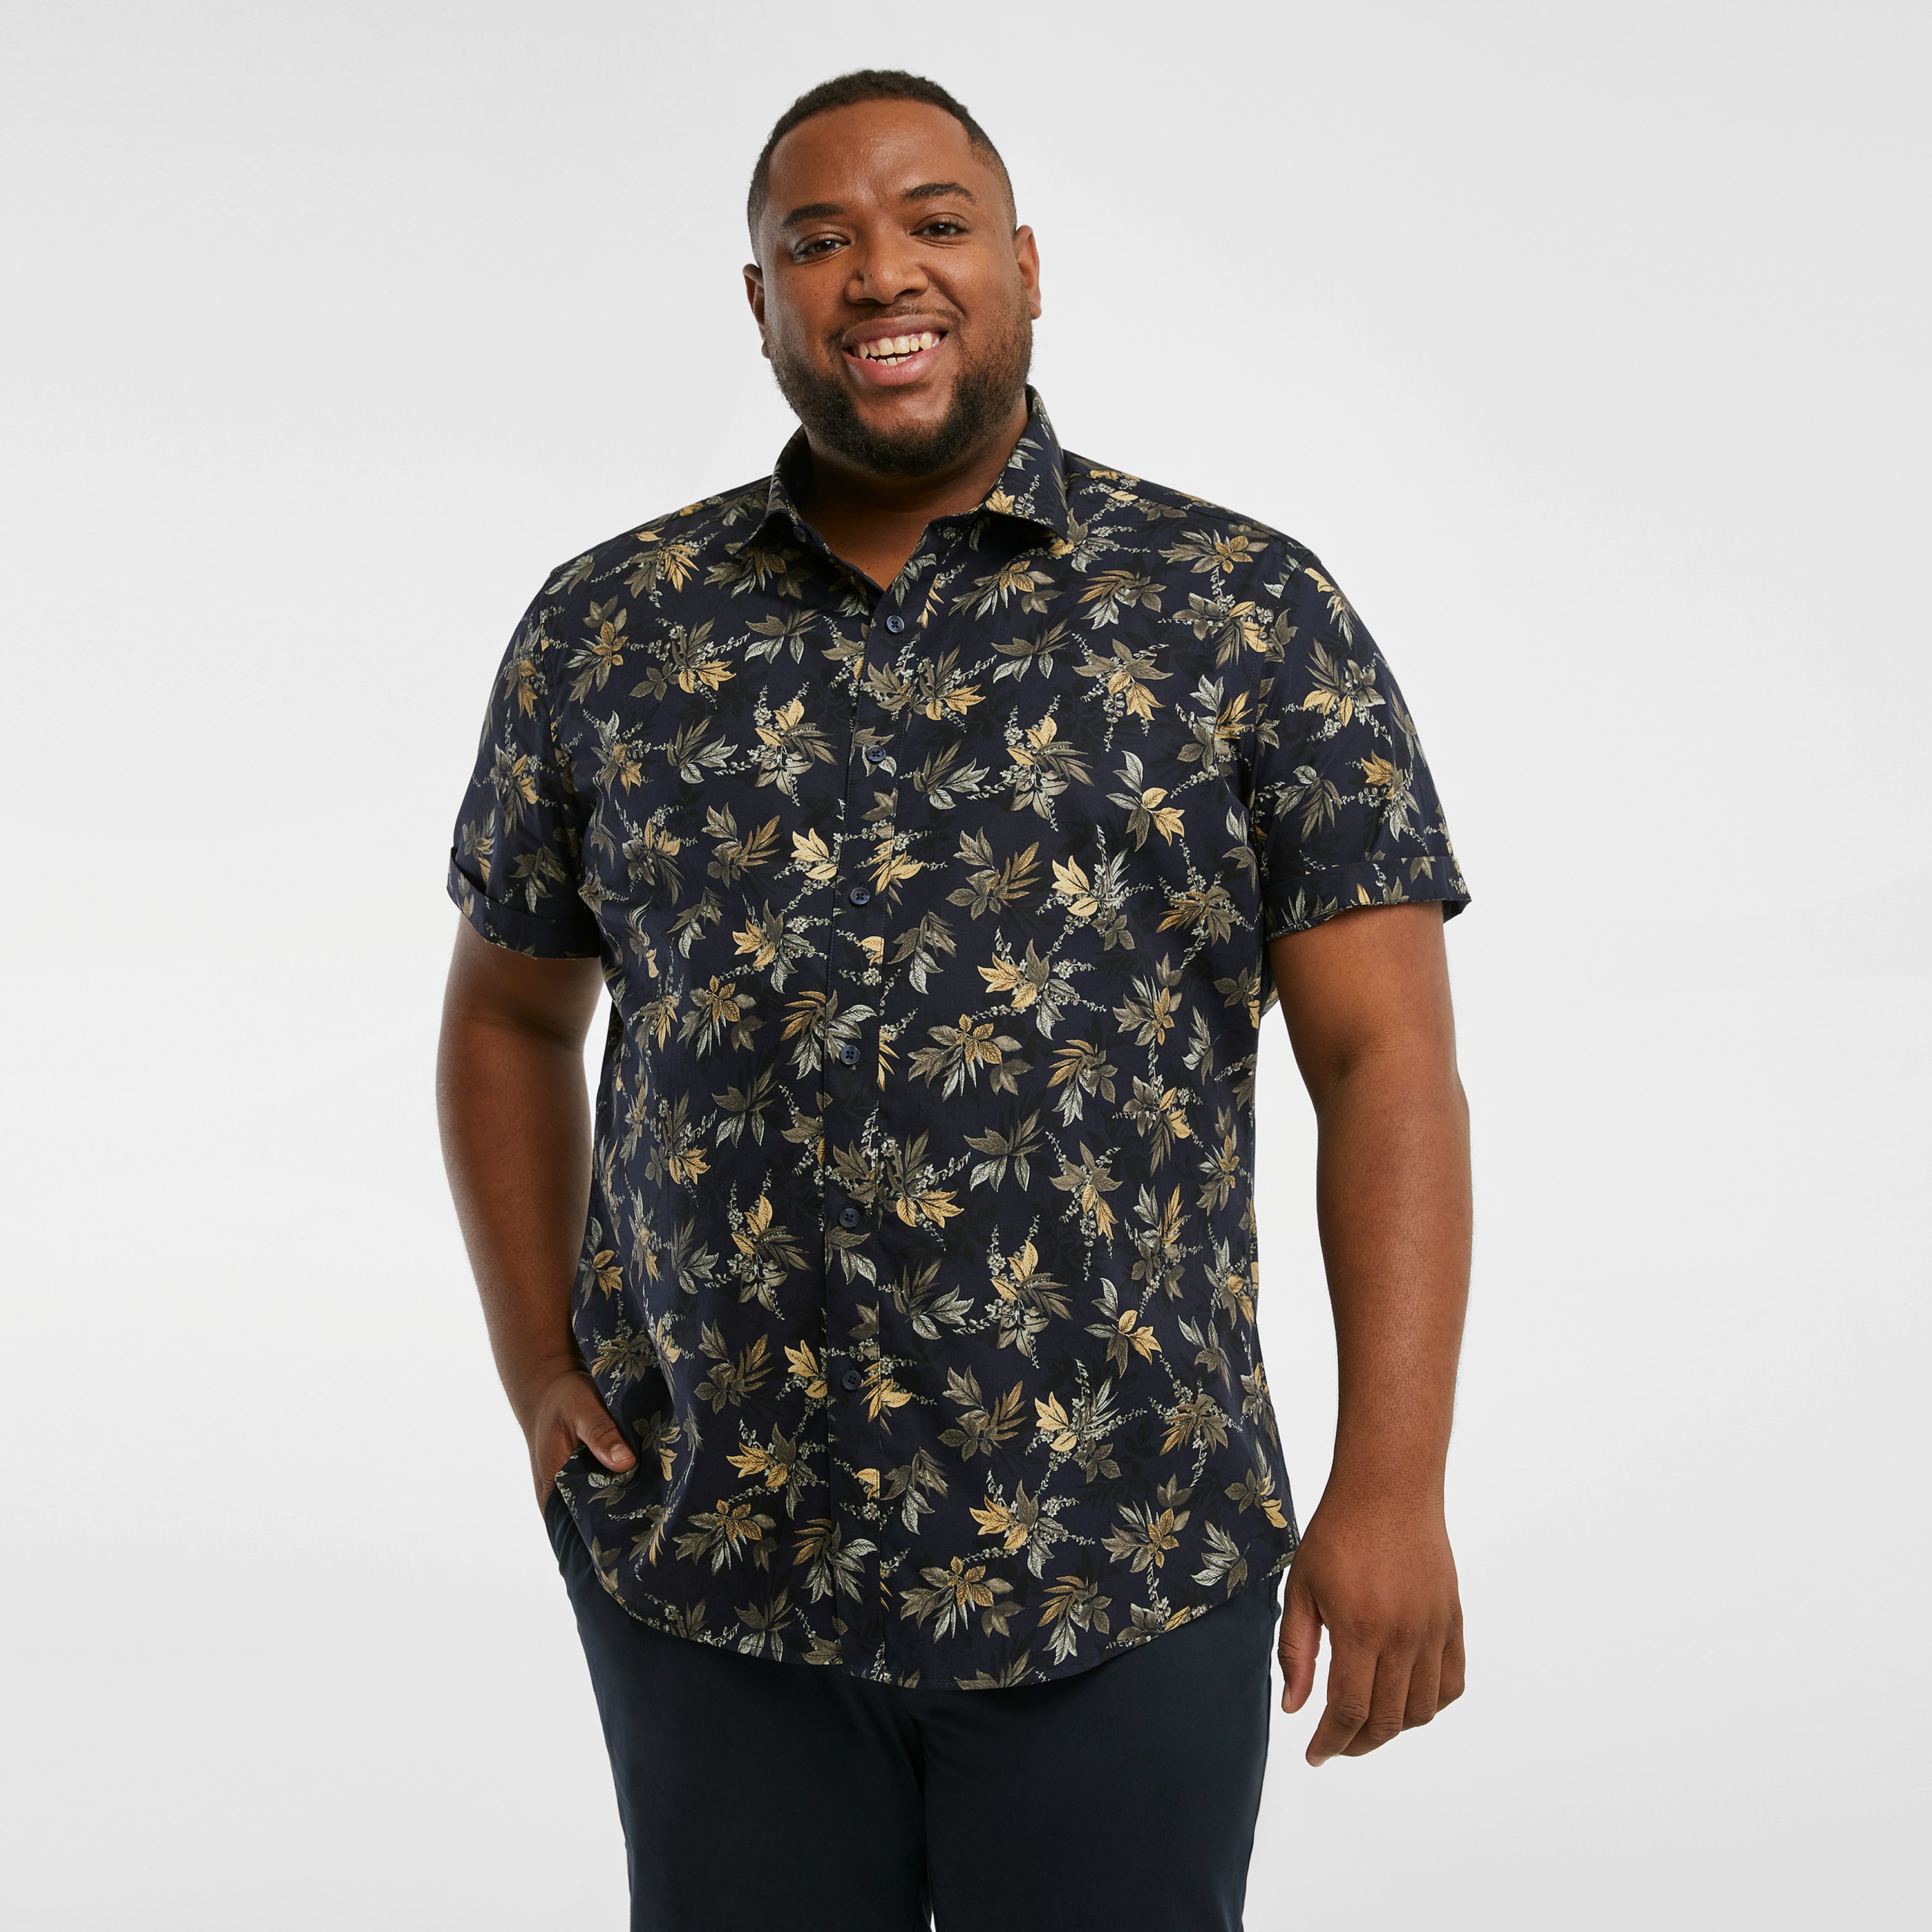 Ink Lloyd Floral Shirt | AXL+CO by Connor